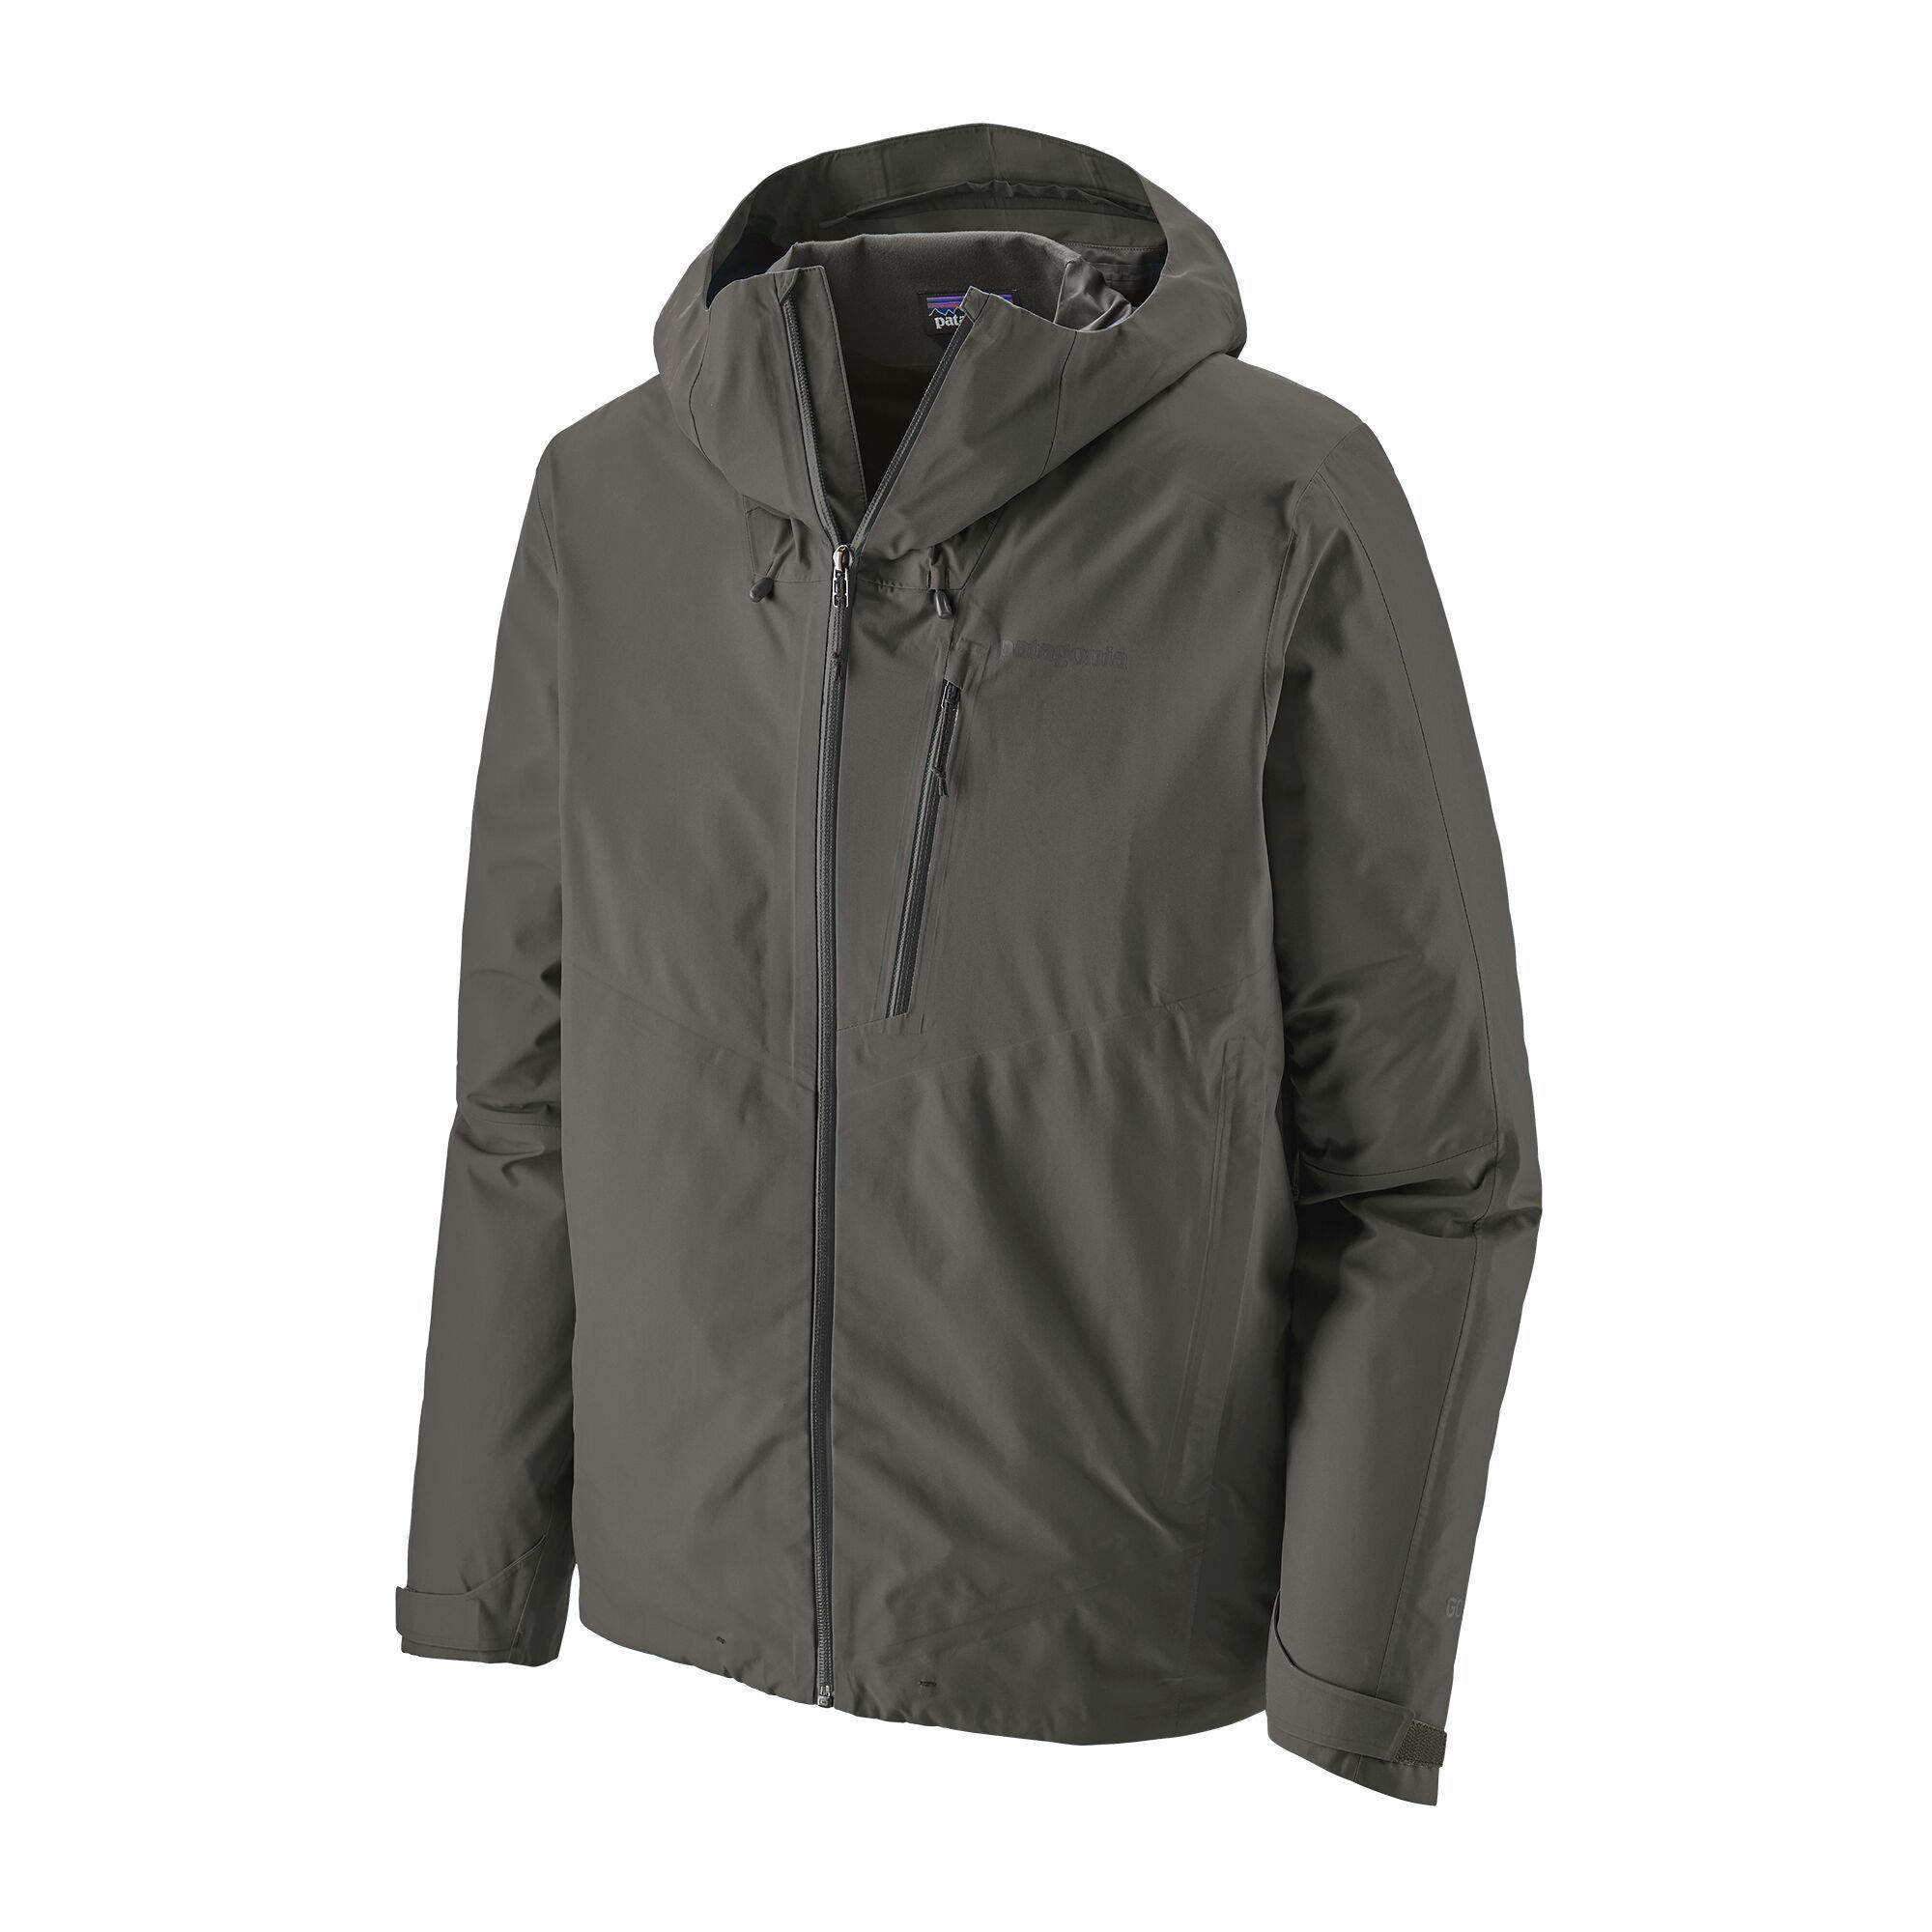 Patagonia Men's Calcite Shell Jacket - Gore-Tex - 100% Recycled Polyester, Forge Grey / S